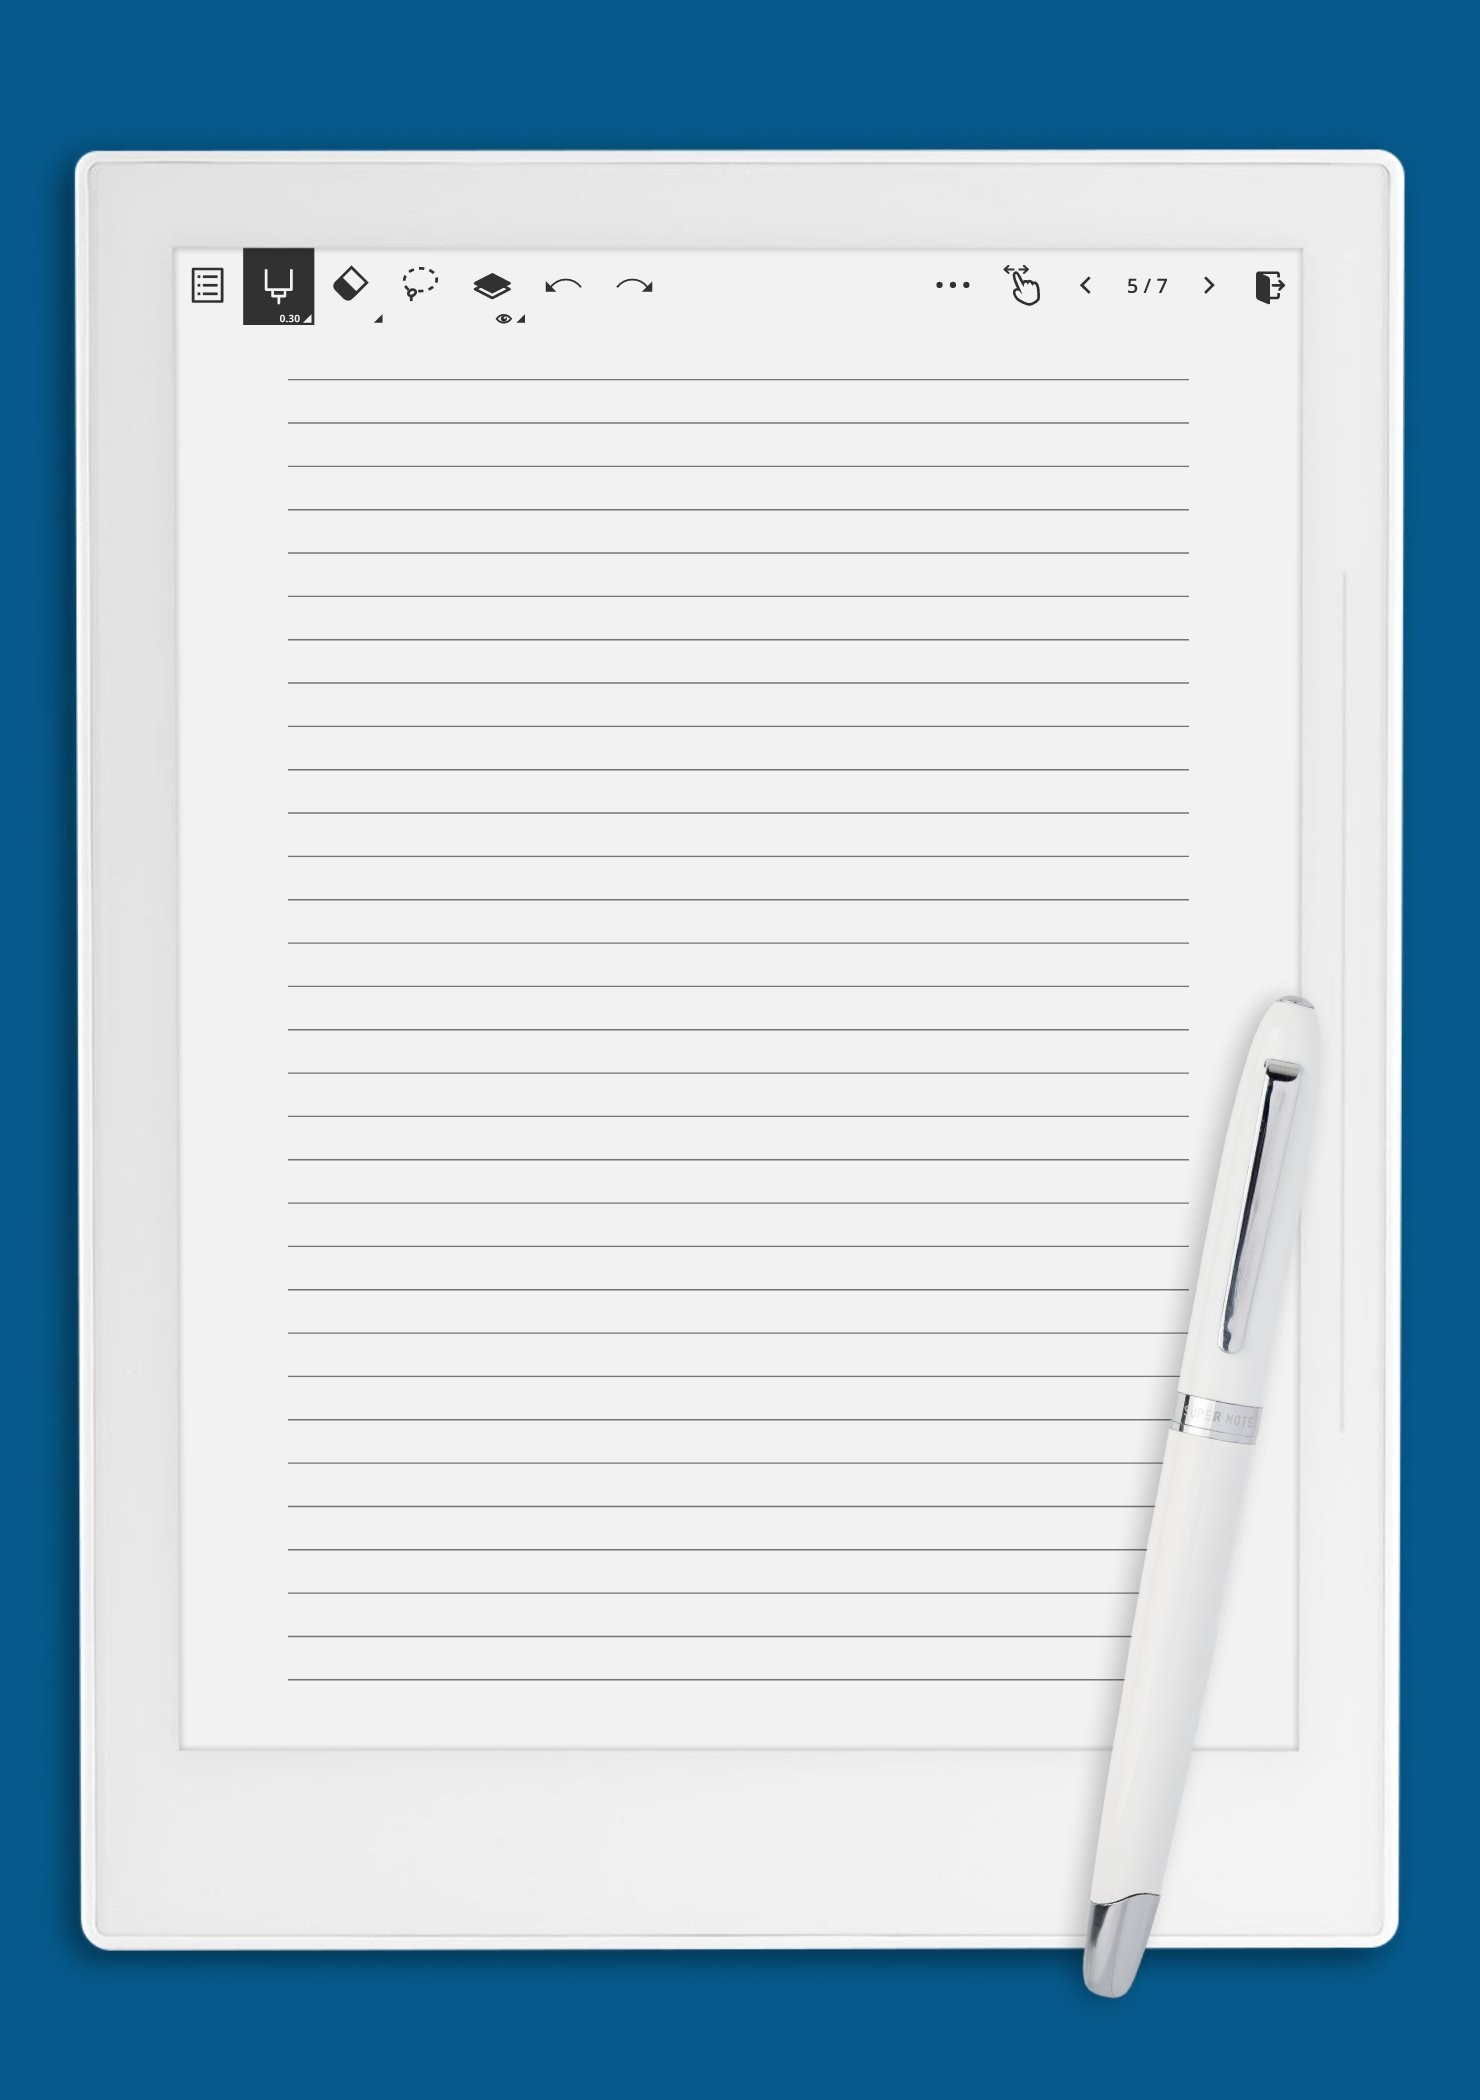 Lined Paper Template - Narrow Ruled 1/4 inch Template - Printable PDF